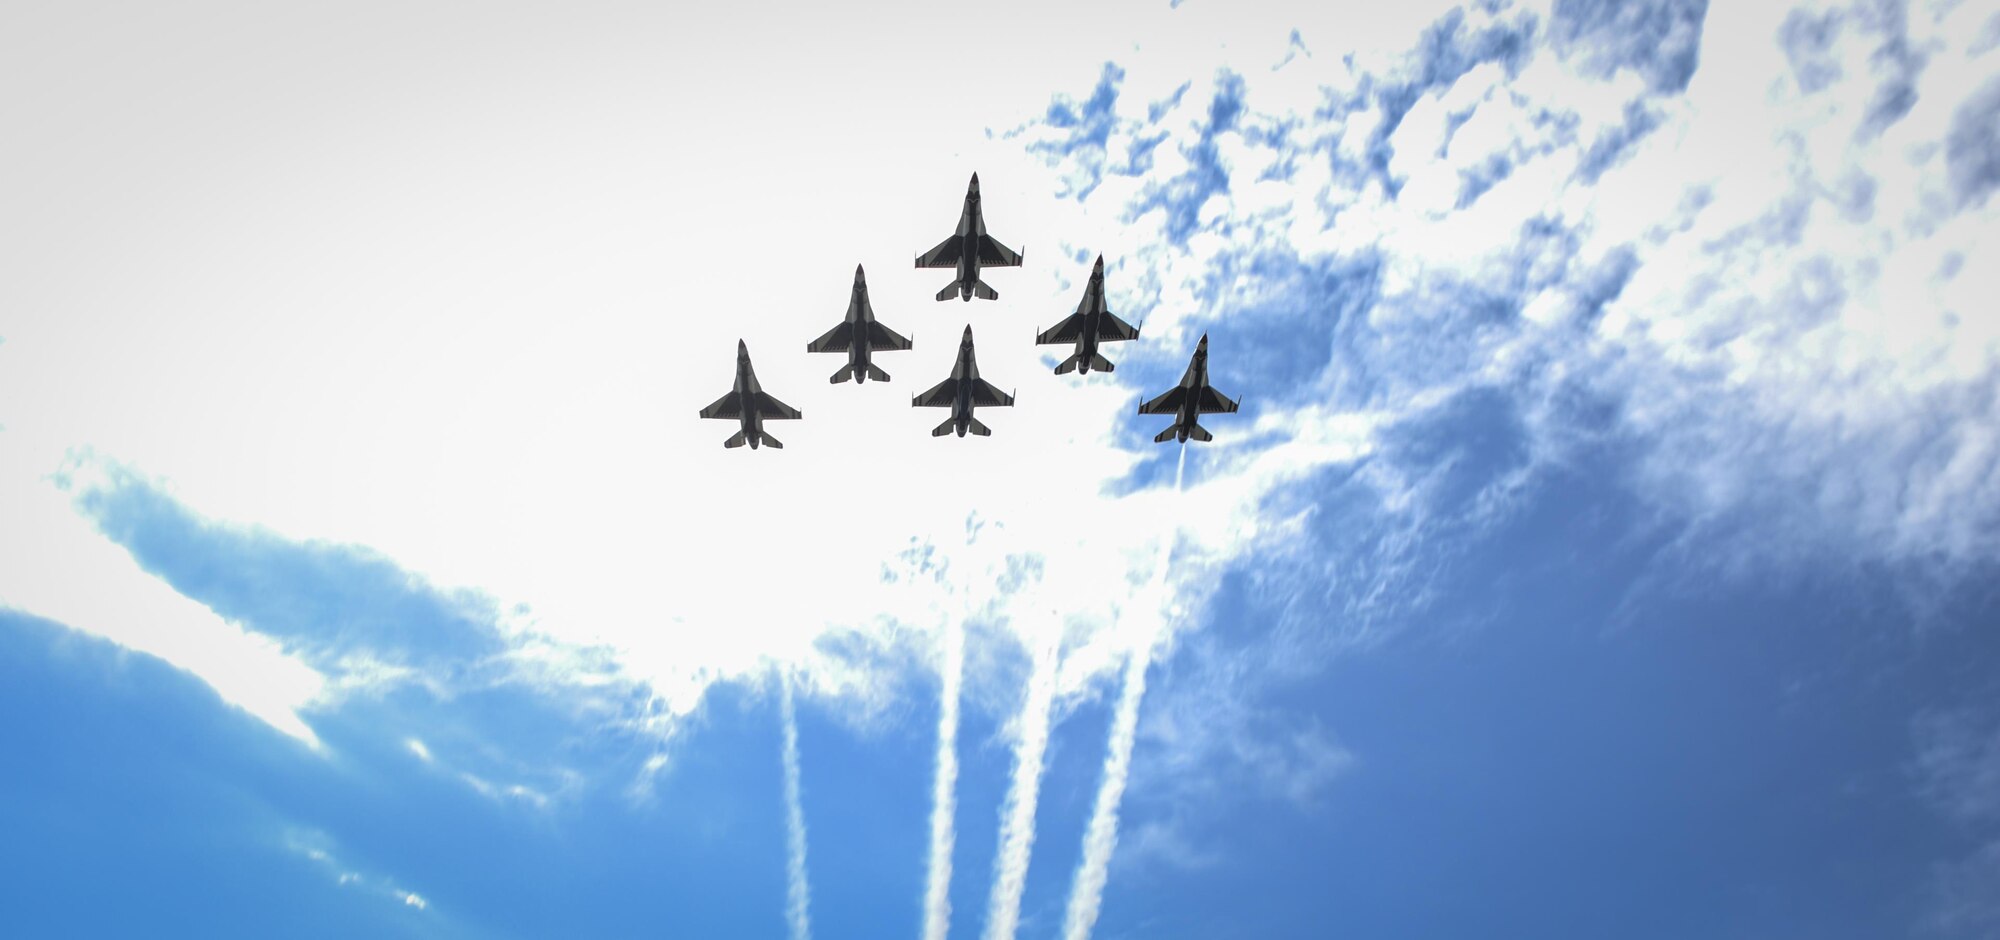 The U.S. Air Force Thunderbirds perform a flyover as the Pensacola Christian College choir sings the National Anthem during a dual Air Force Cross ceremony, April 20, 2017, at Hurlburt Field, Fla. For the first time in Air Force history, two Airmen were simultaneously awarded the service’s highest medal for valorous action in combat. Miller, from the Air National Guard’s 123rd Special Tactics Squadron, and Chris Baradat, a combat controller since separated, both received Silver Star medals for their actions in combat, which were upgraded after a service-wide review. (U.S. Air Force photo by Airman 1st Class Dennis Spain) 